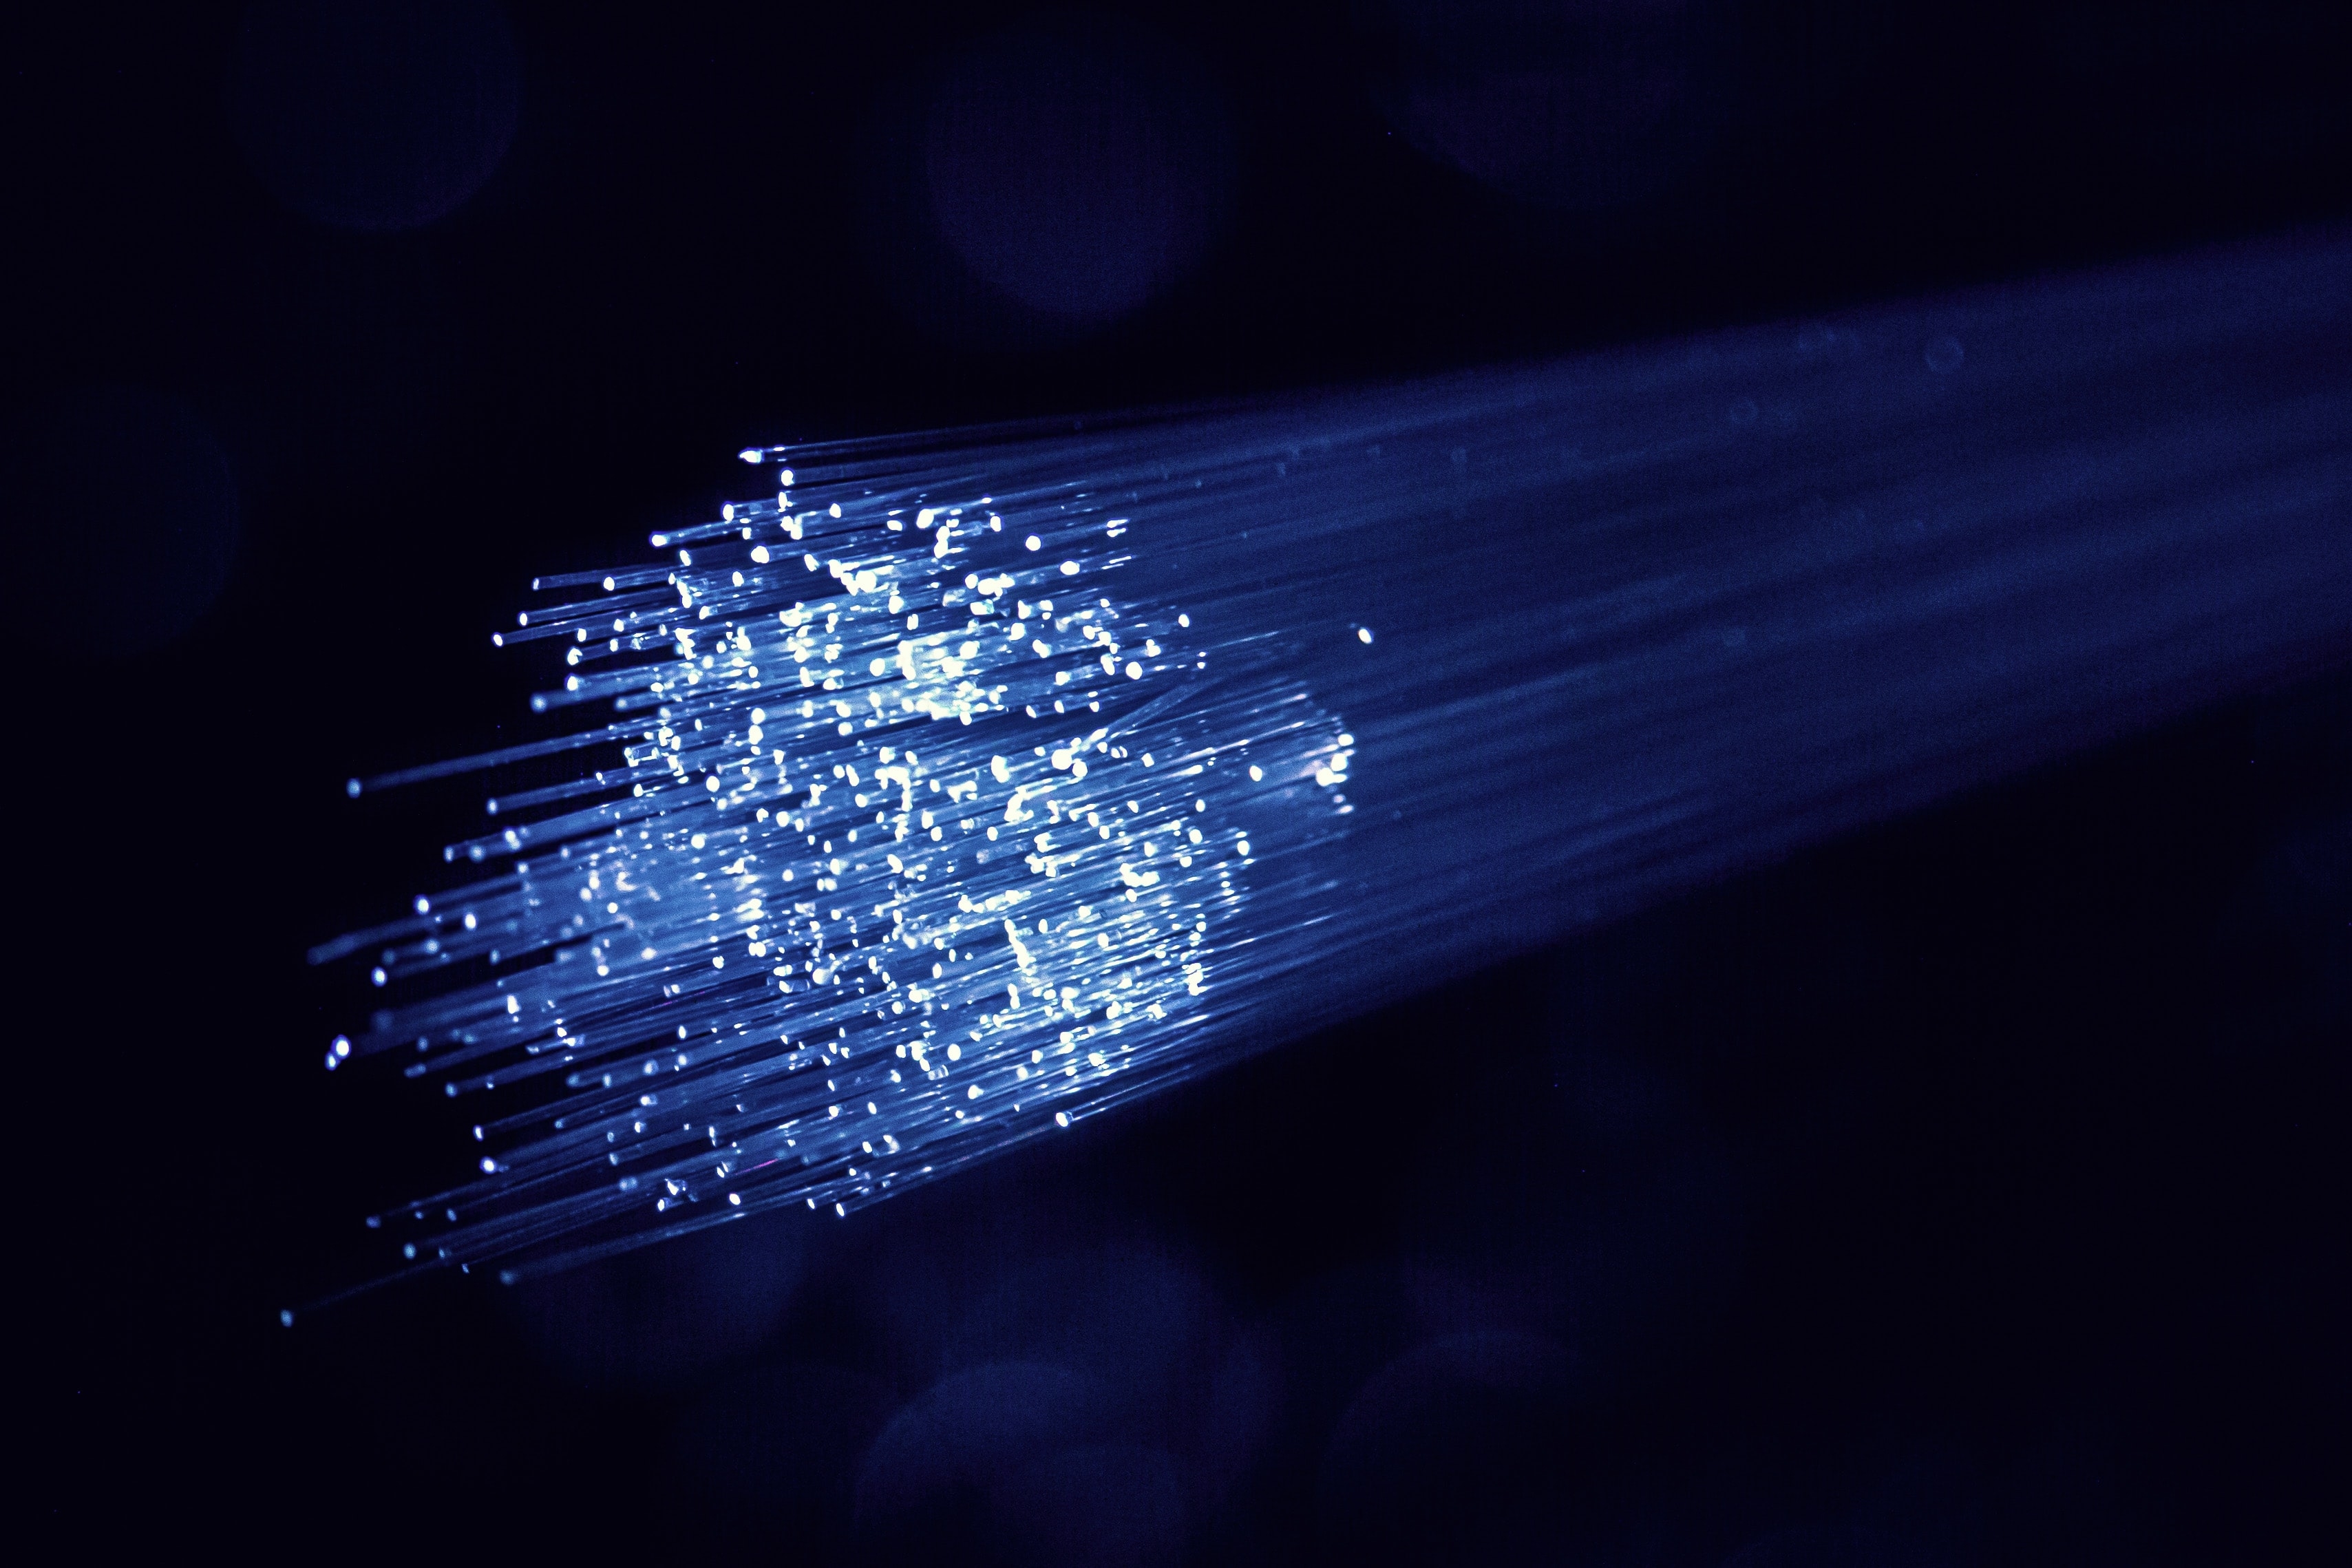 Fiber-optic cables can act as seismometers